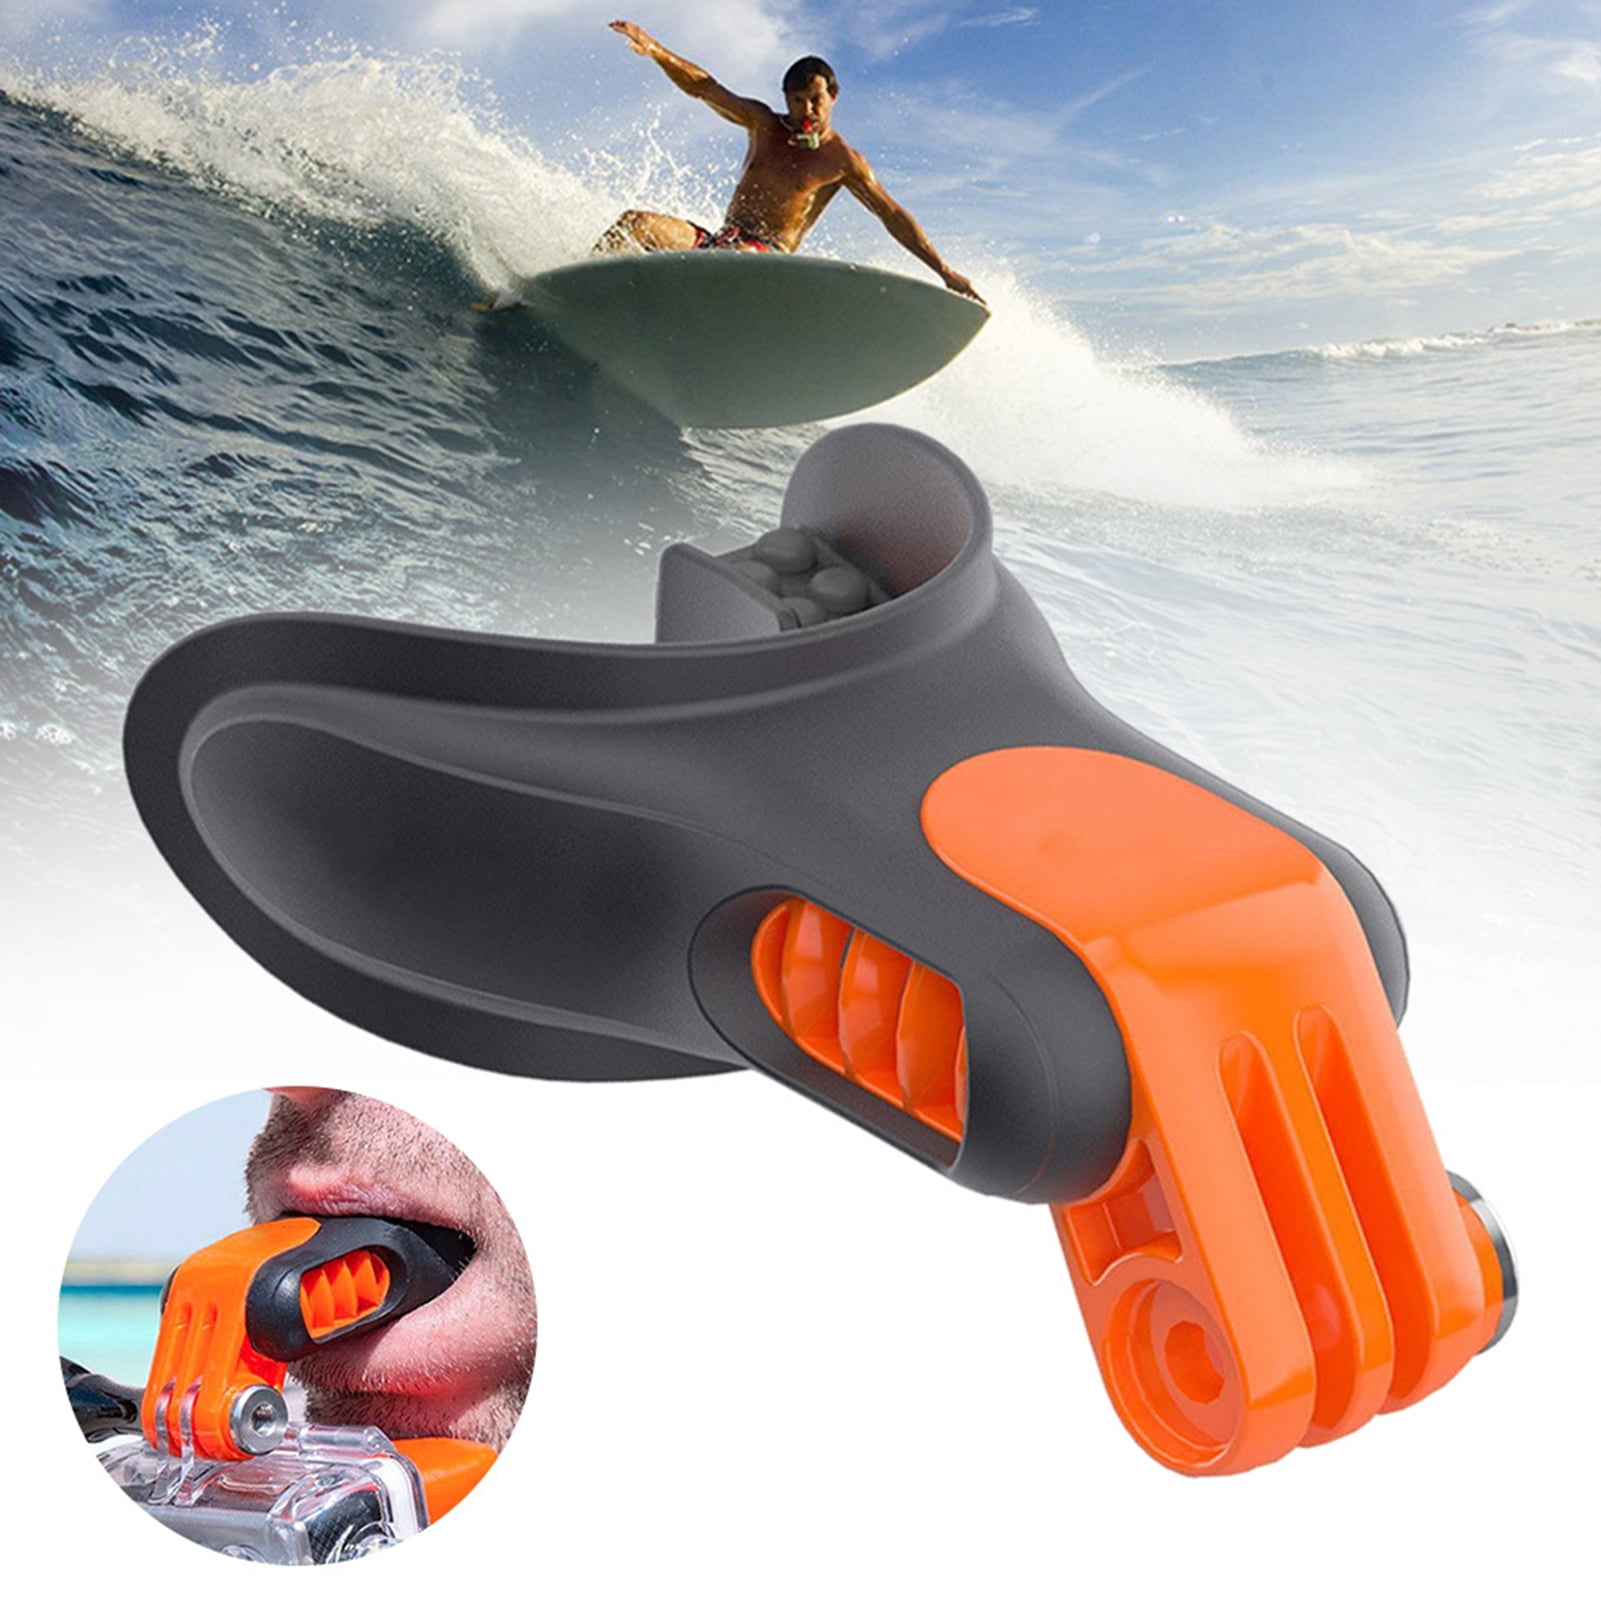 Blue Mouth Bite Mount Mouthpiece Holder Adapter Surfing Diving Skating with Floaty and Neck Lanyard for Gopro Hero 7/6/5/4/3/3 for SJCAM for XiaoYi Action Camera